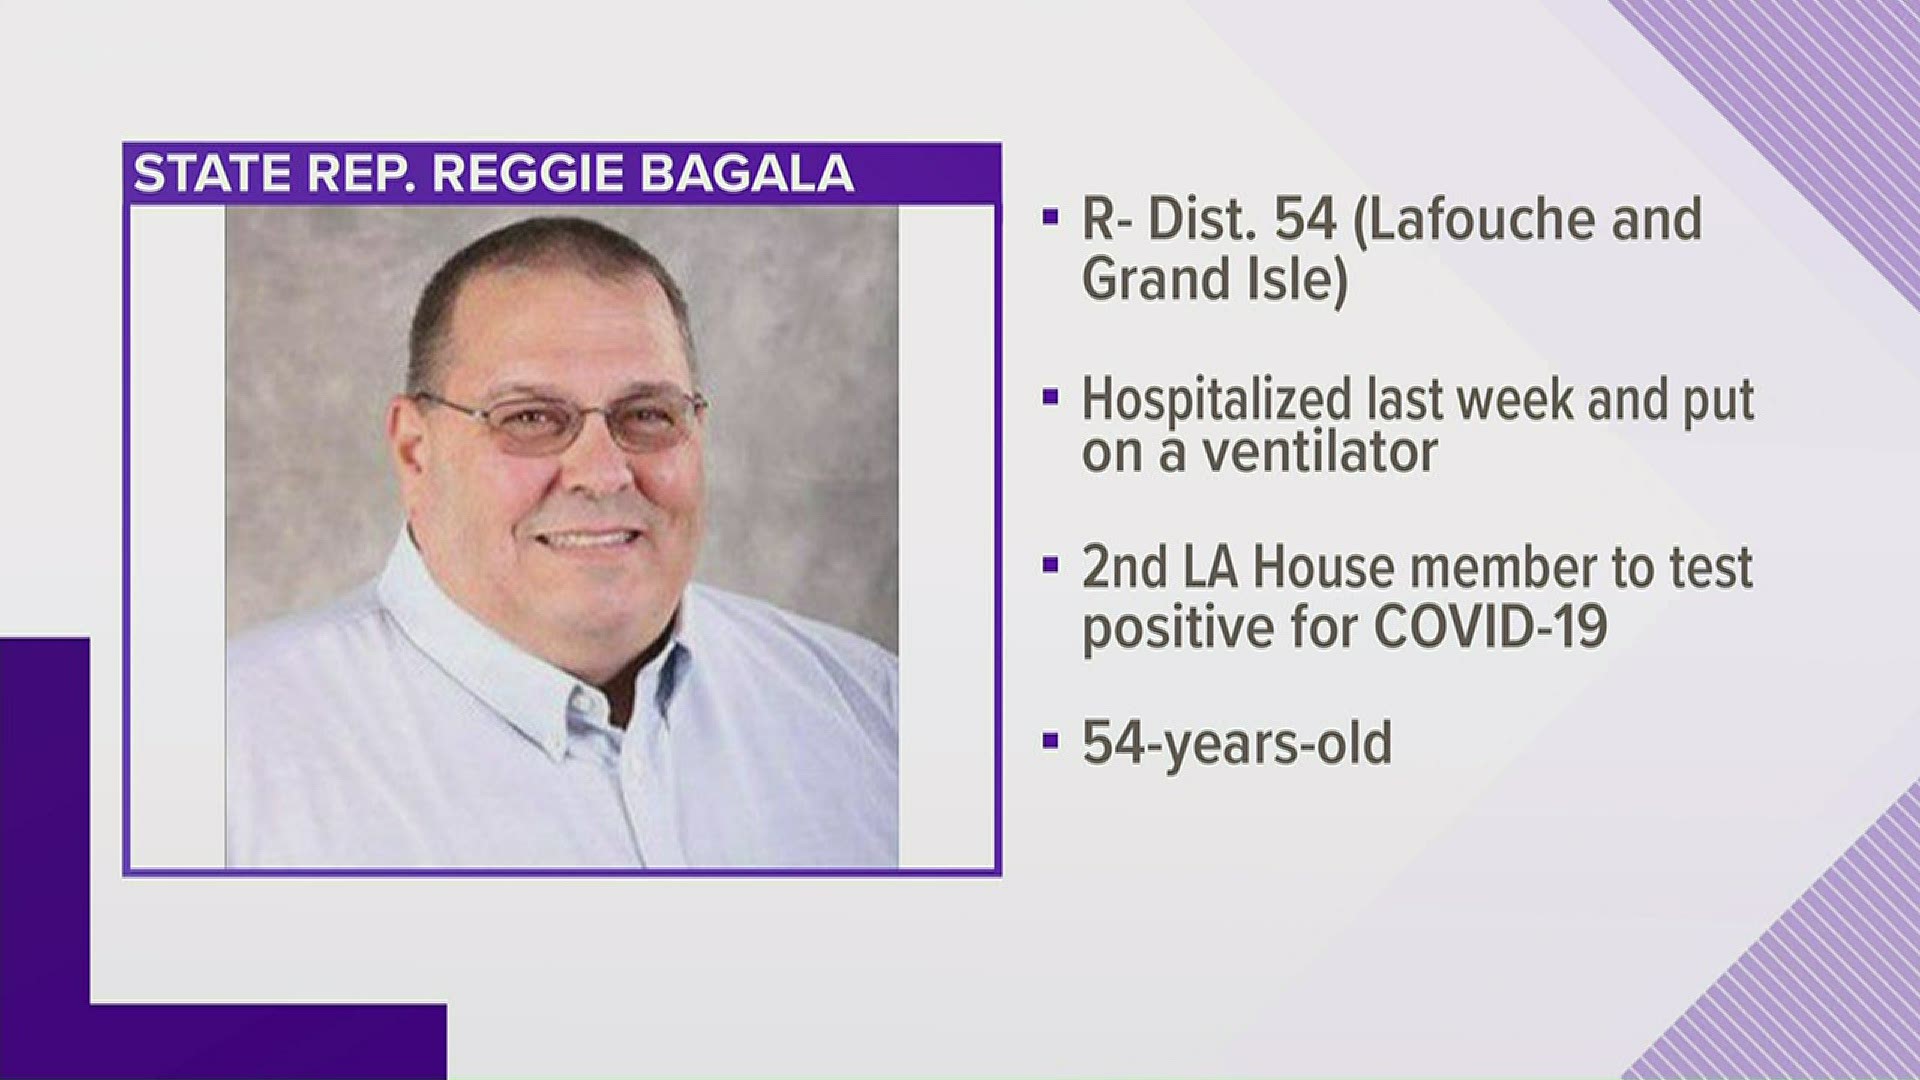 Announced by Bagala's son, Tristan Bagala, on Facebook, the lawmaker's death at 54 marks the first COVID-19 death among members of the Louisiana Legislature.